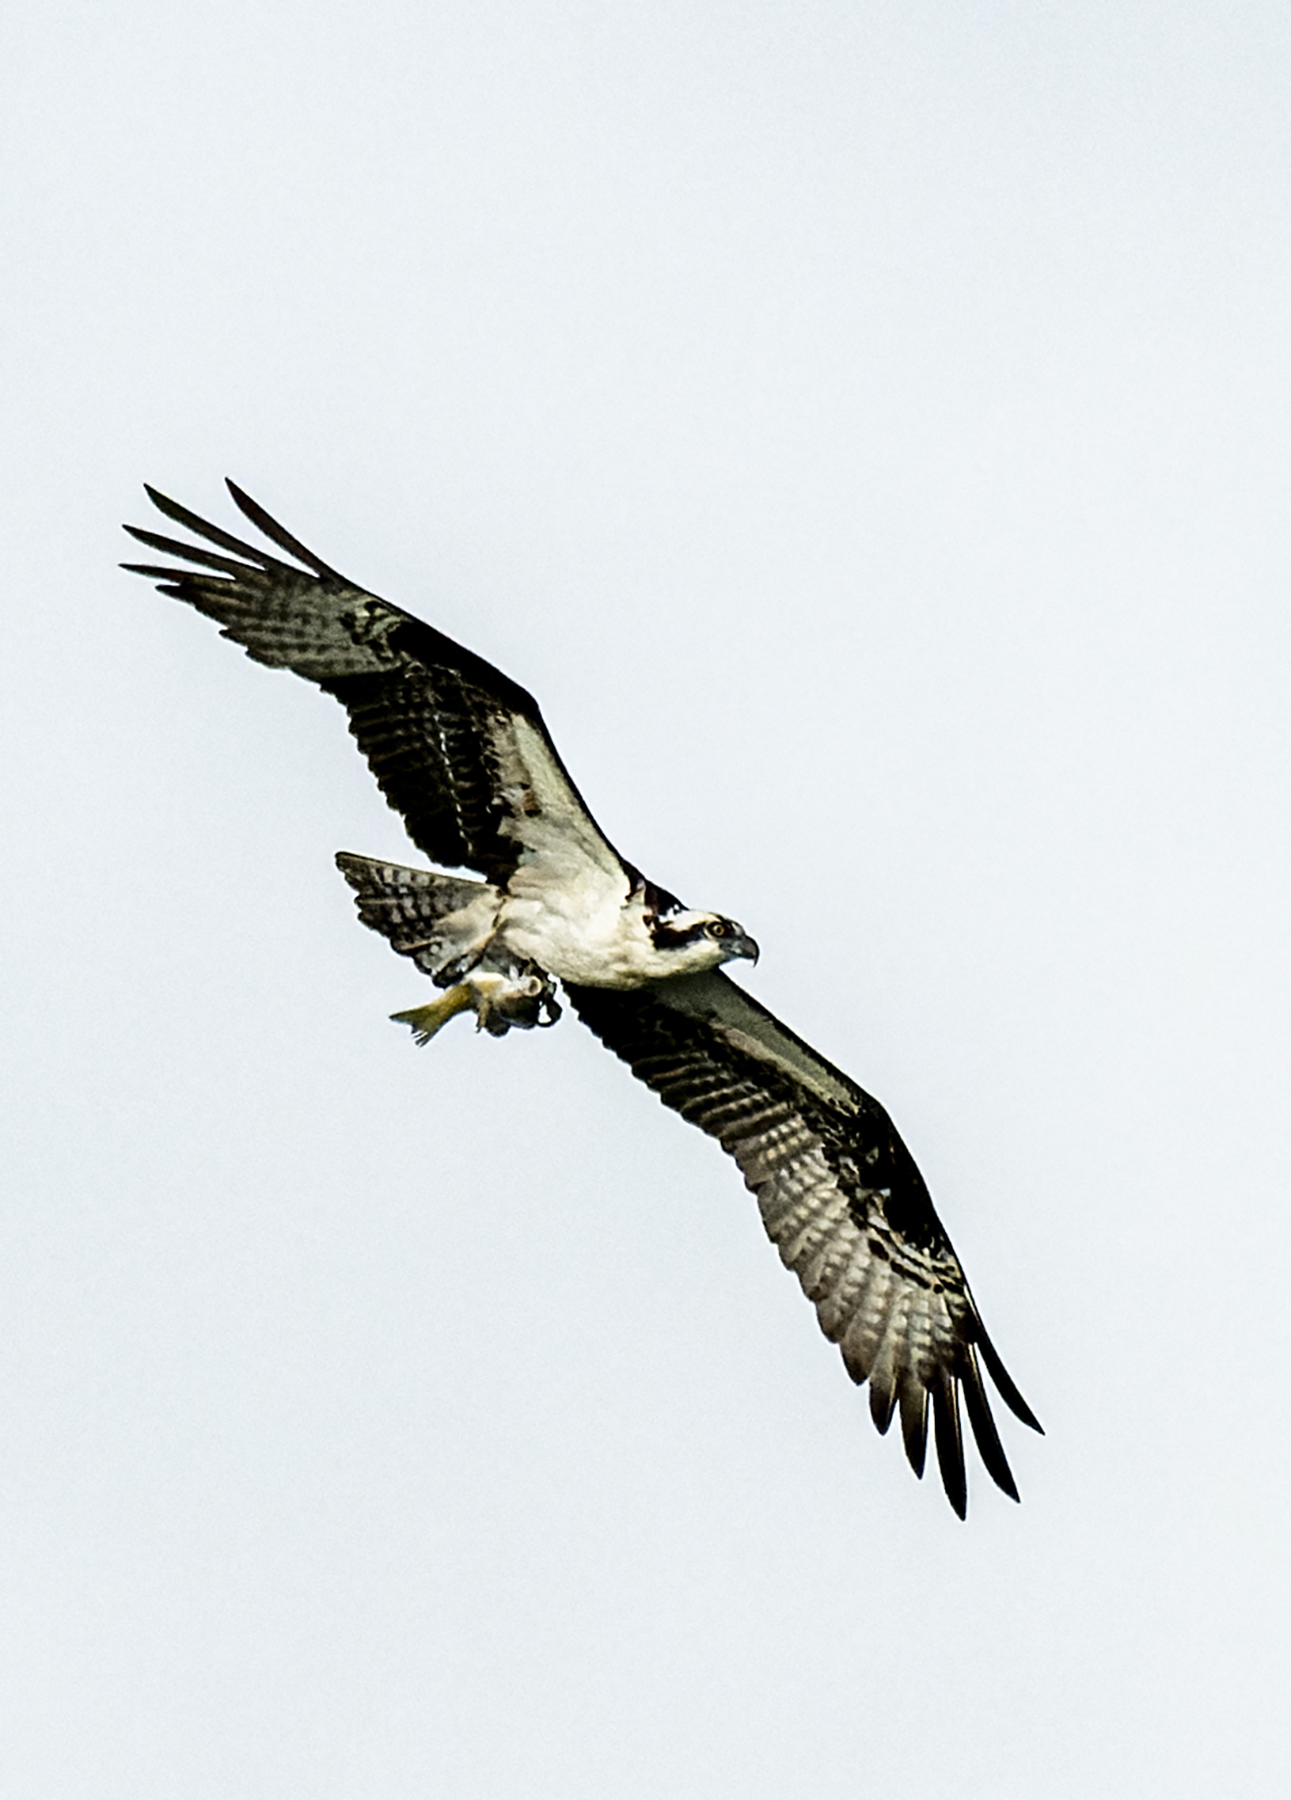 Another-Osprey-With-Fish